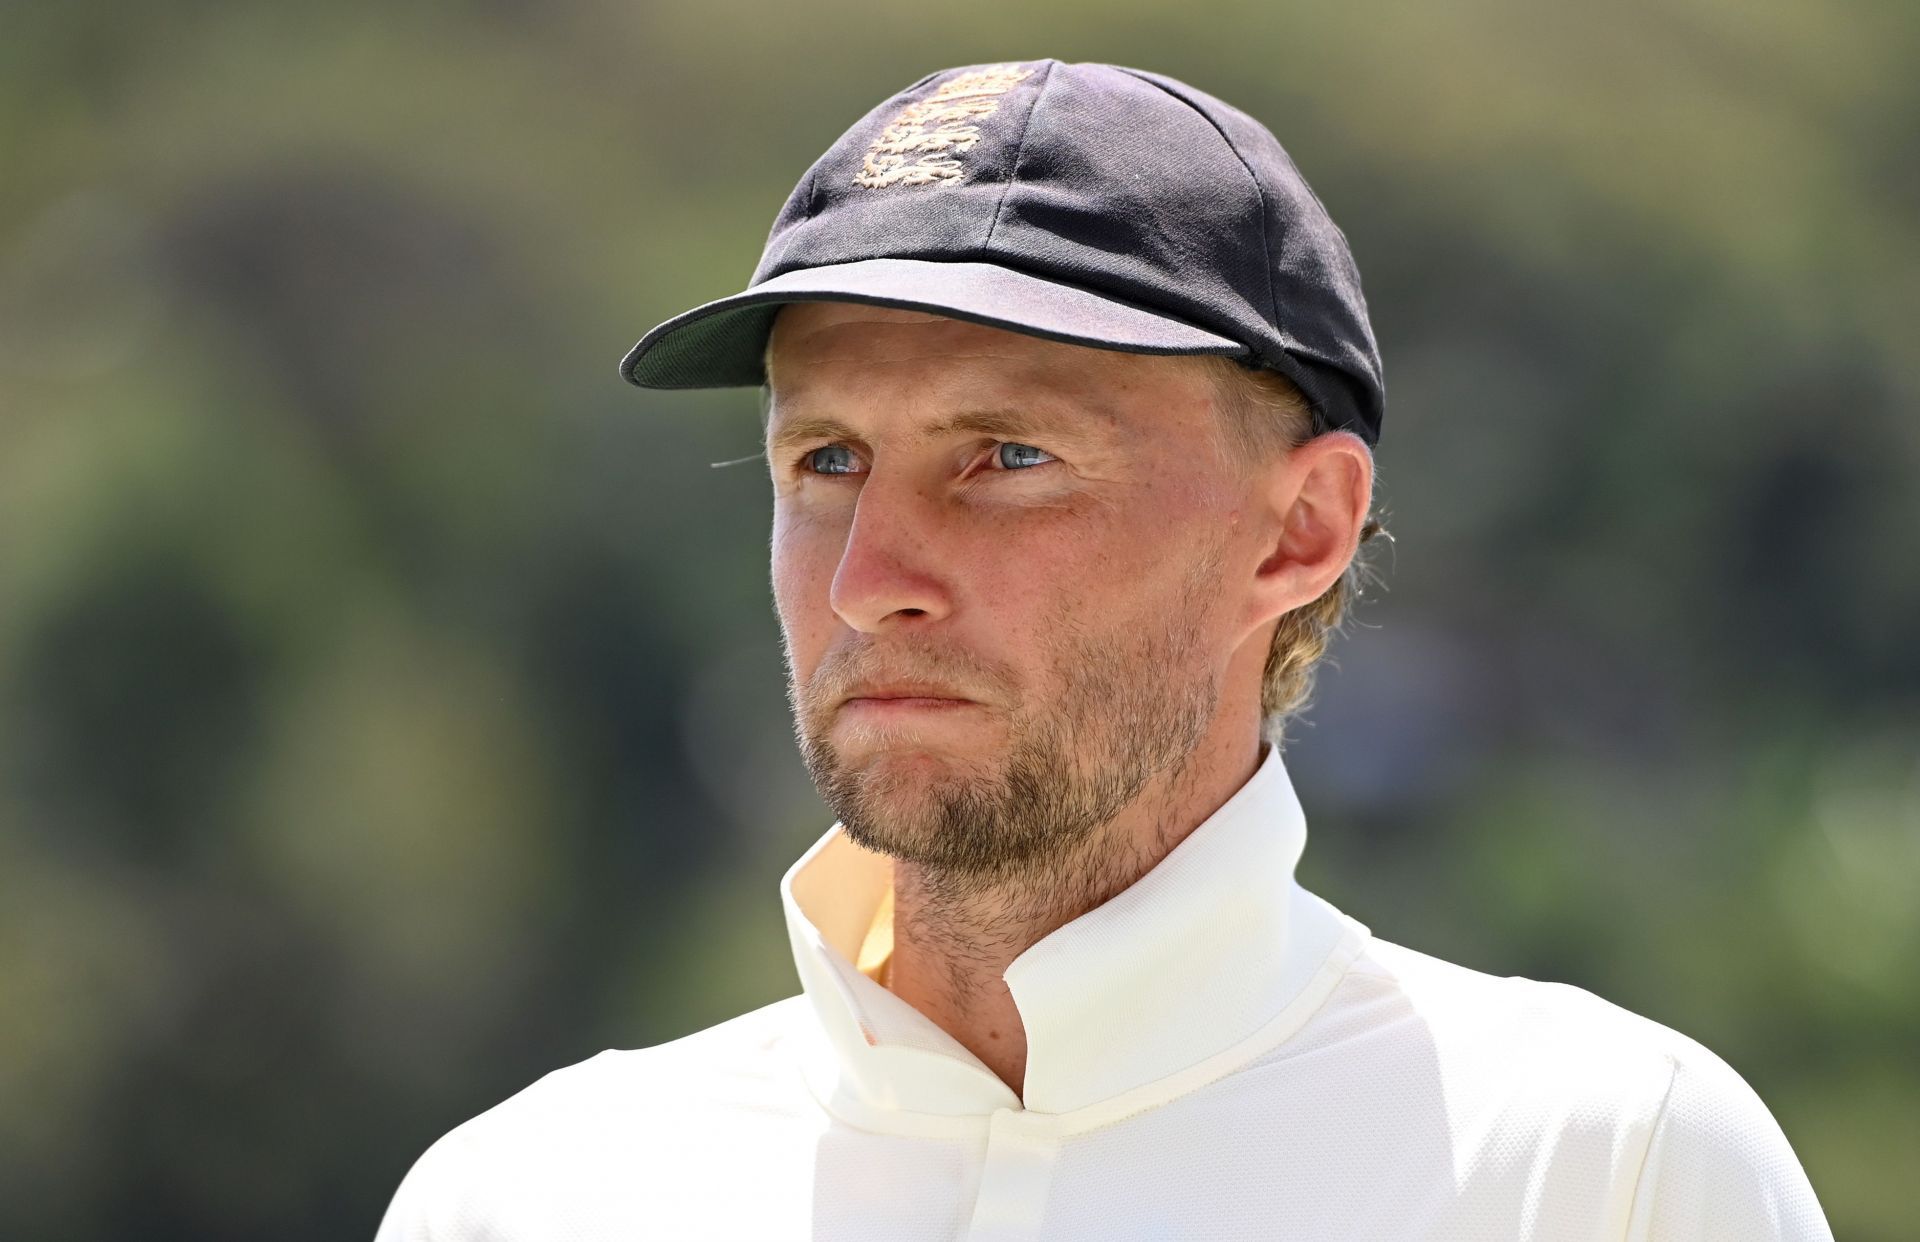 Joe Root struggled towards the end of his tenure as Test leader. Pic: Getty Images